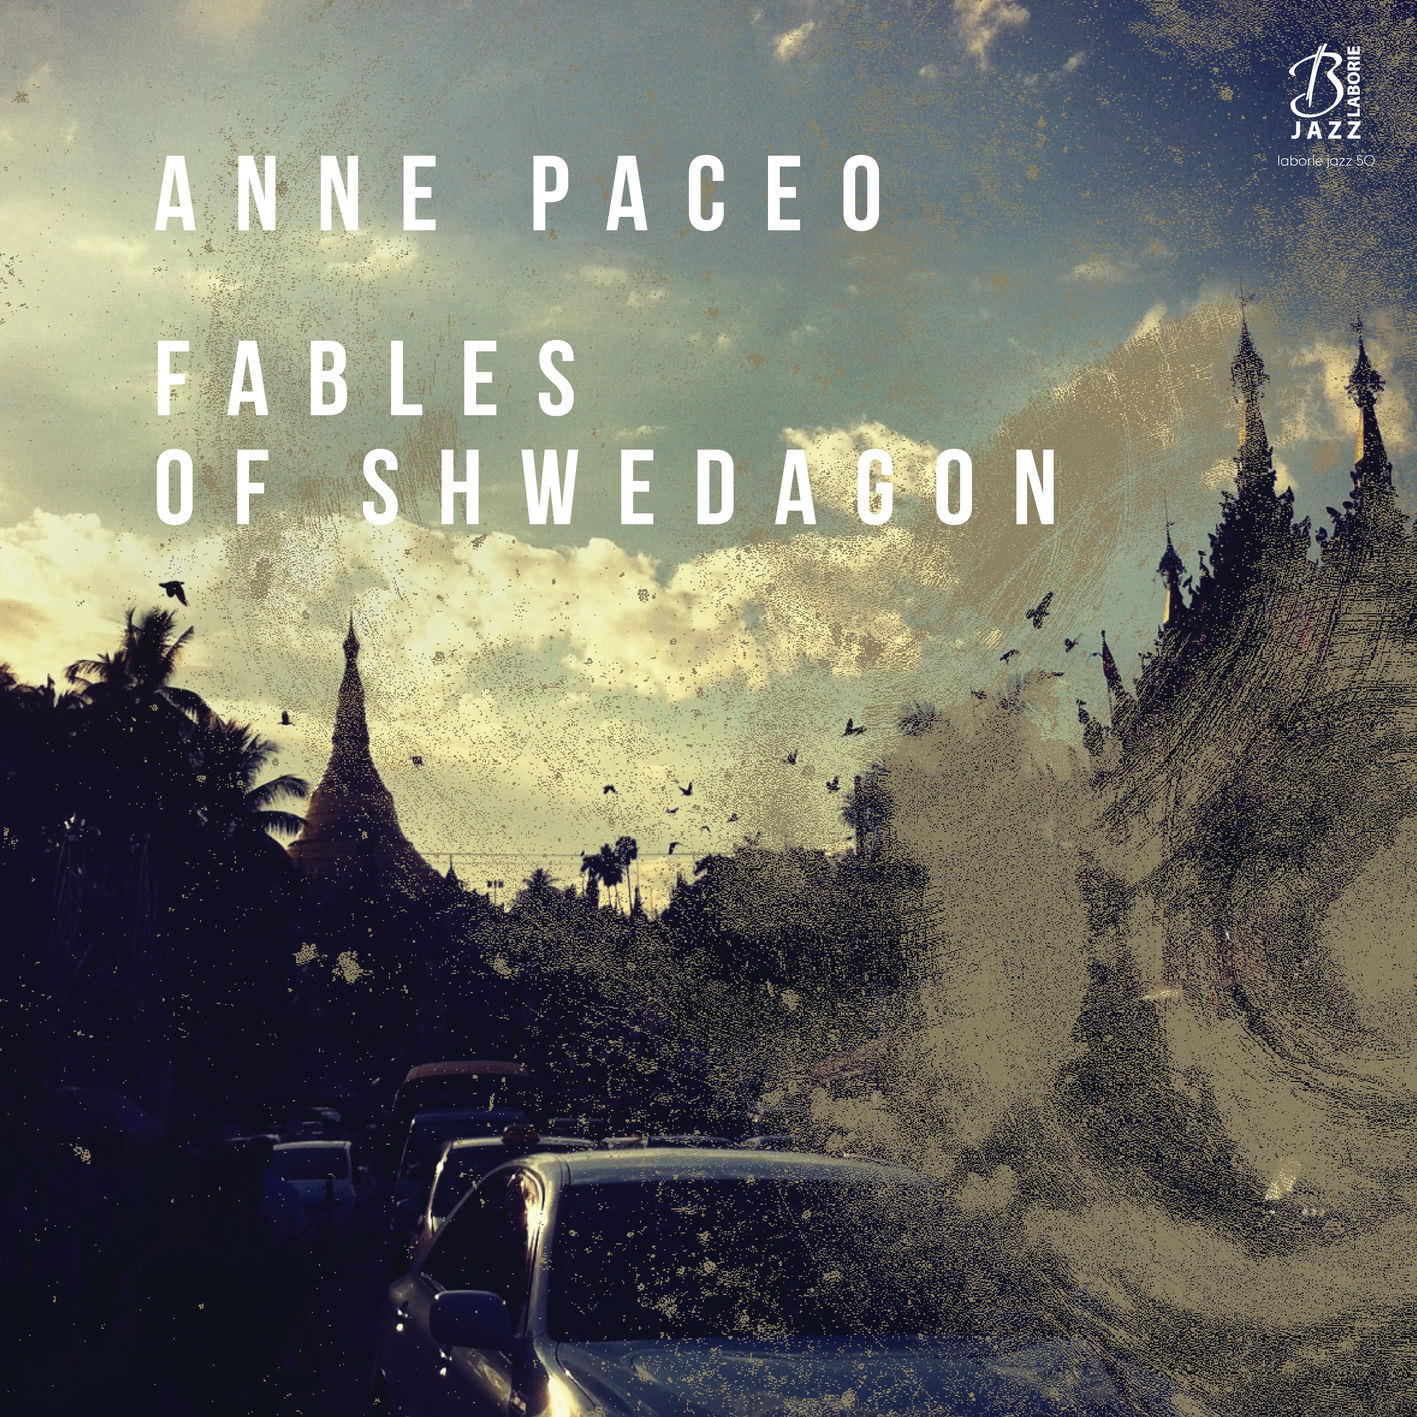 Anne Paceo - Fables of Shwedagon (2018) [FLAC 24bit/44,1kHz]